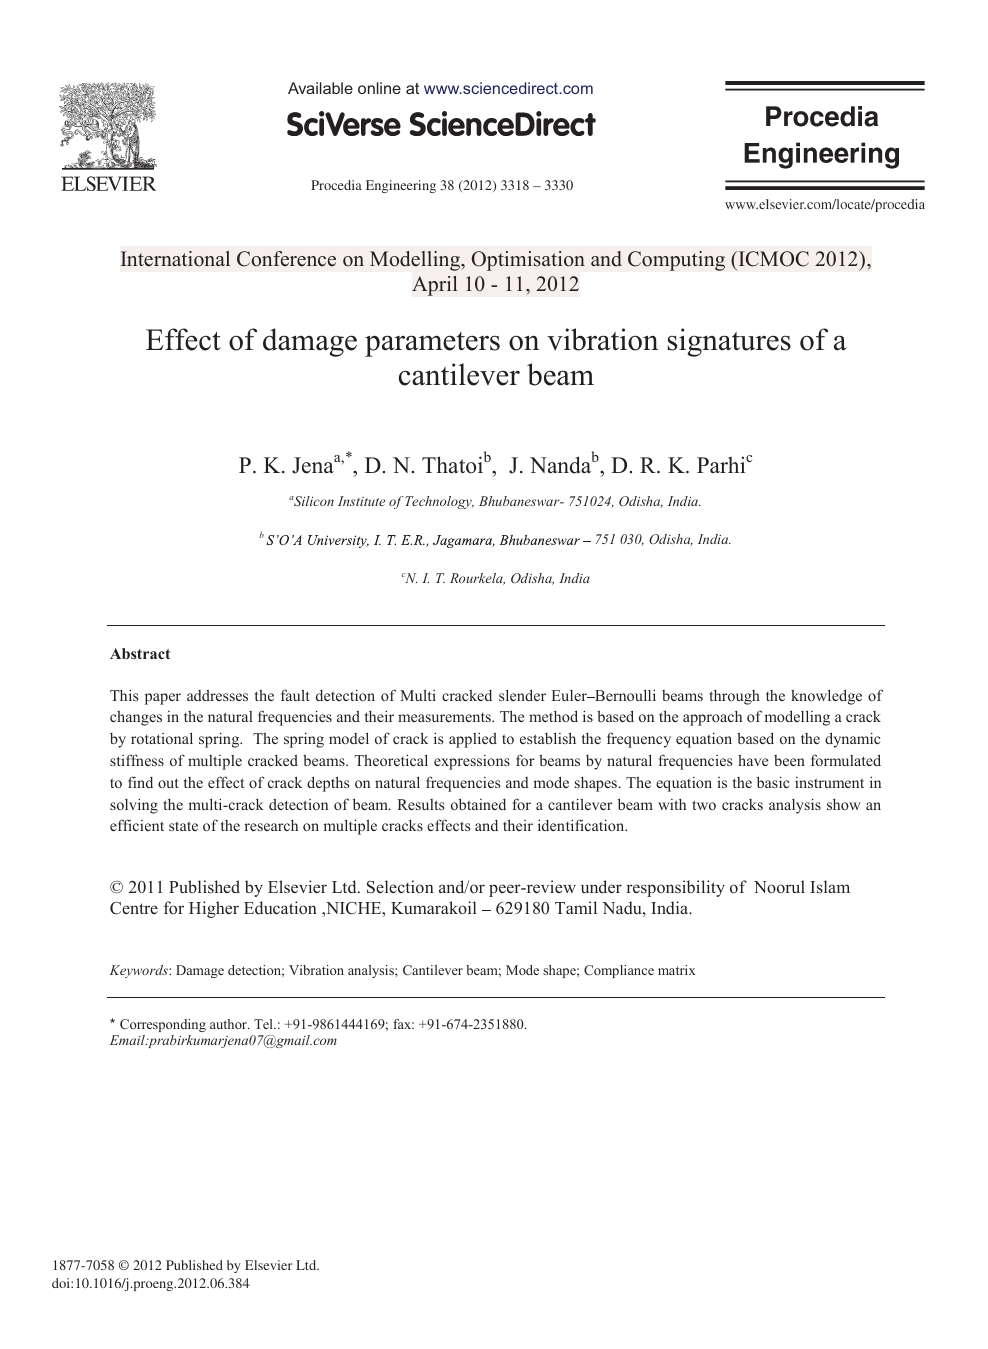 Effect Of Damage Parameters On Vibration Signatures Of A Cantilever Beam Topic Of Research Paper In Materials Engineering Download Scholarly Article Pdf And Read For Free On Cyberleninka Open Science Hub